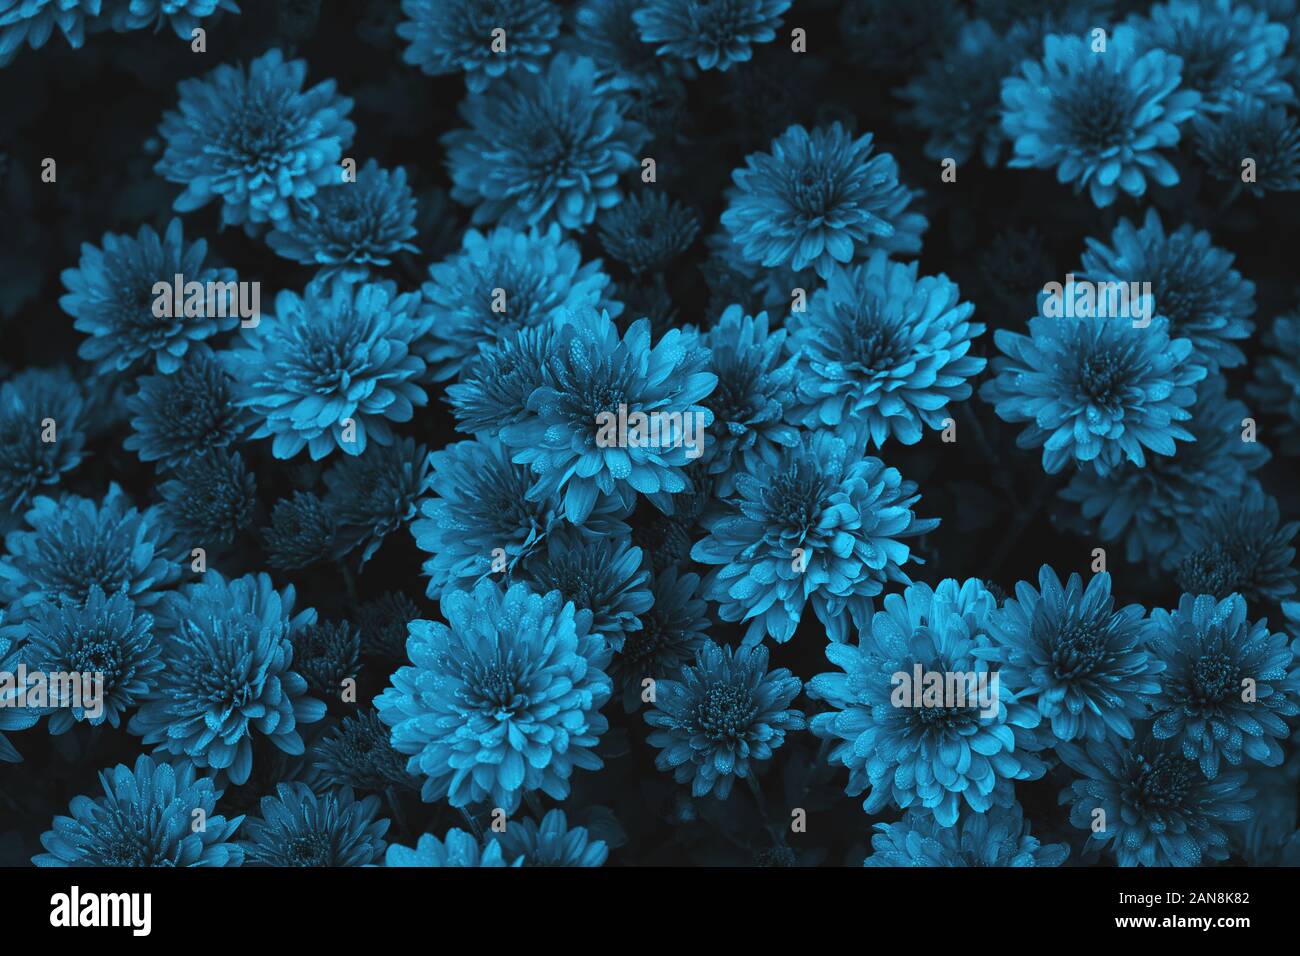 Blue chrysanthemum flowers background, top view, image toned Stock Photo